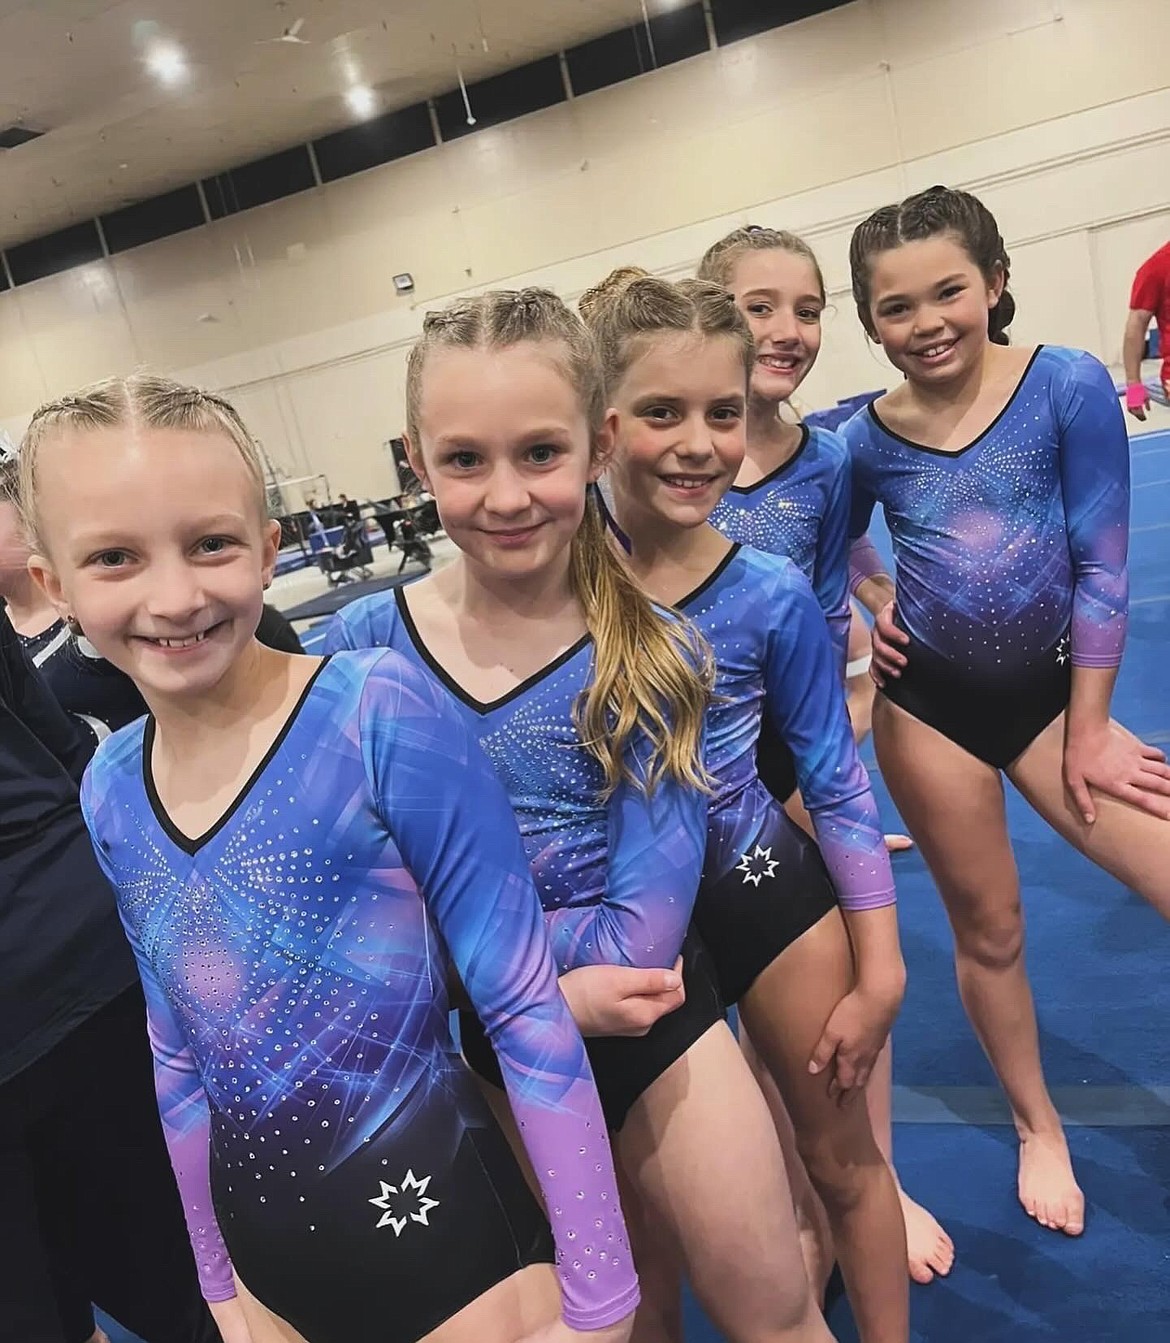 Courtesy photo
GEMS Athletic Center Gold Session 5 at the state Xcel gymnastics championships March 22-24 in Boise. From left are Hunter Bangs, Olivia Kiser, Ensley Vucinich, Lois Chesley and Kinley Bodman.